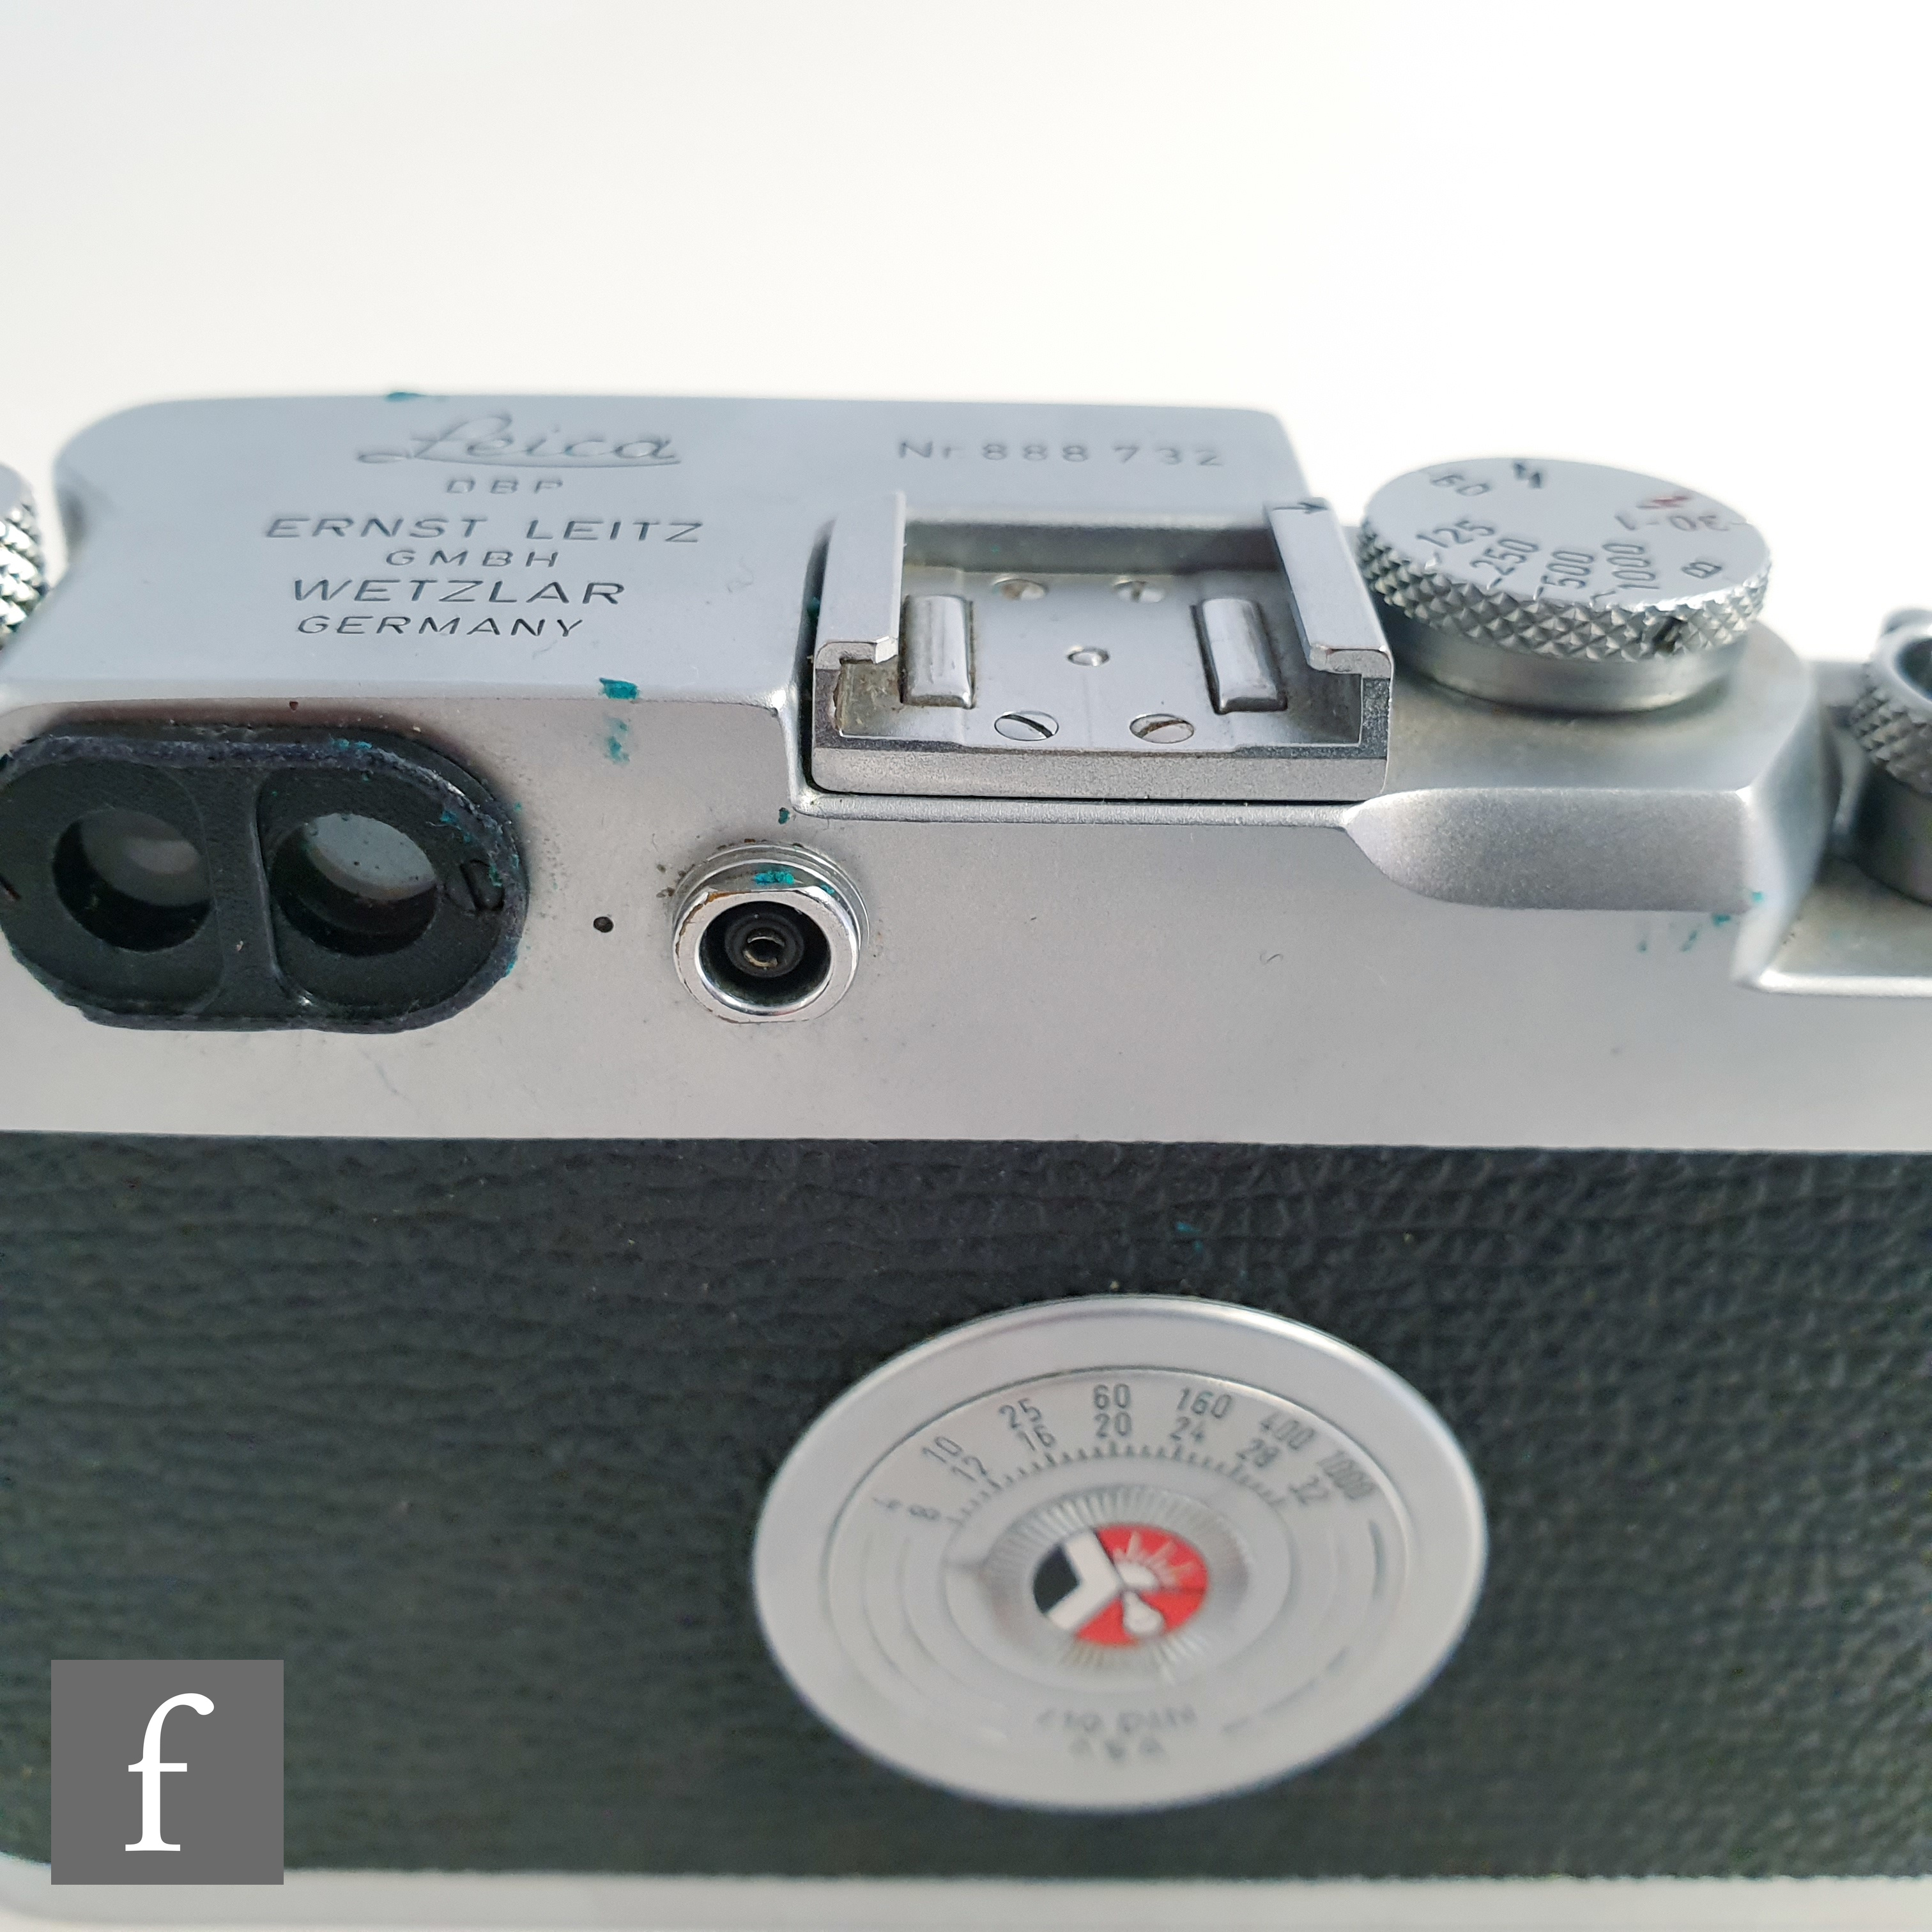 A Leica IIIG rangefinder screw mount camera, circa 1957, serial number 888732, with Ernst Leitz f= - Image 2 of 6